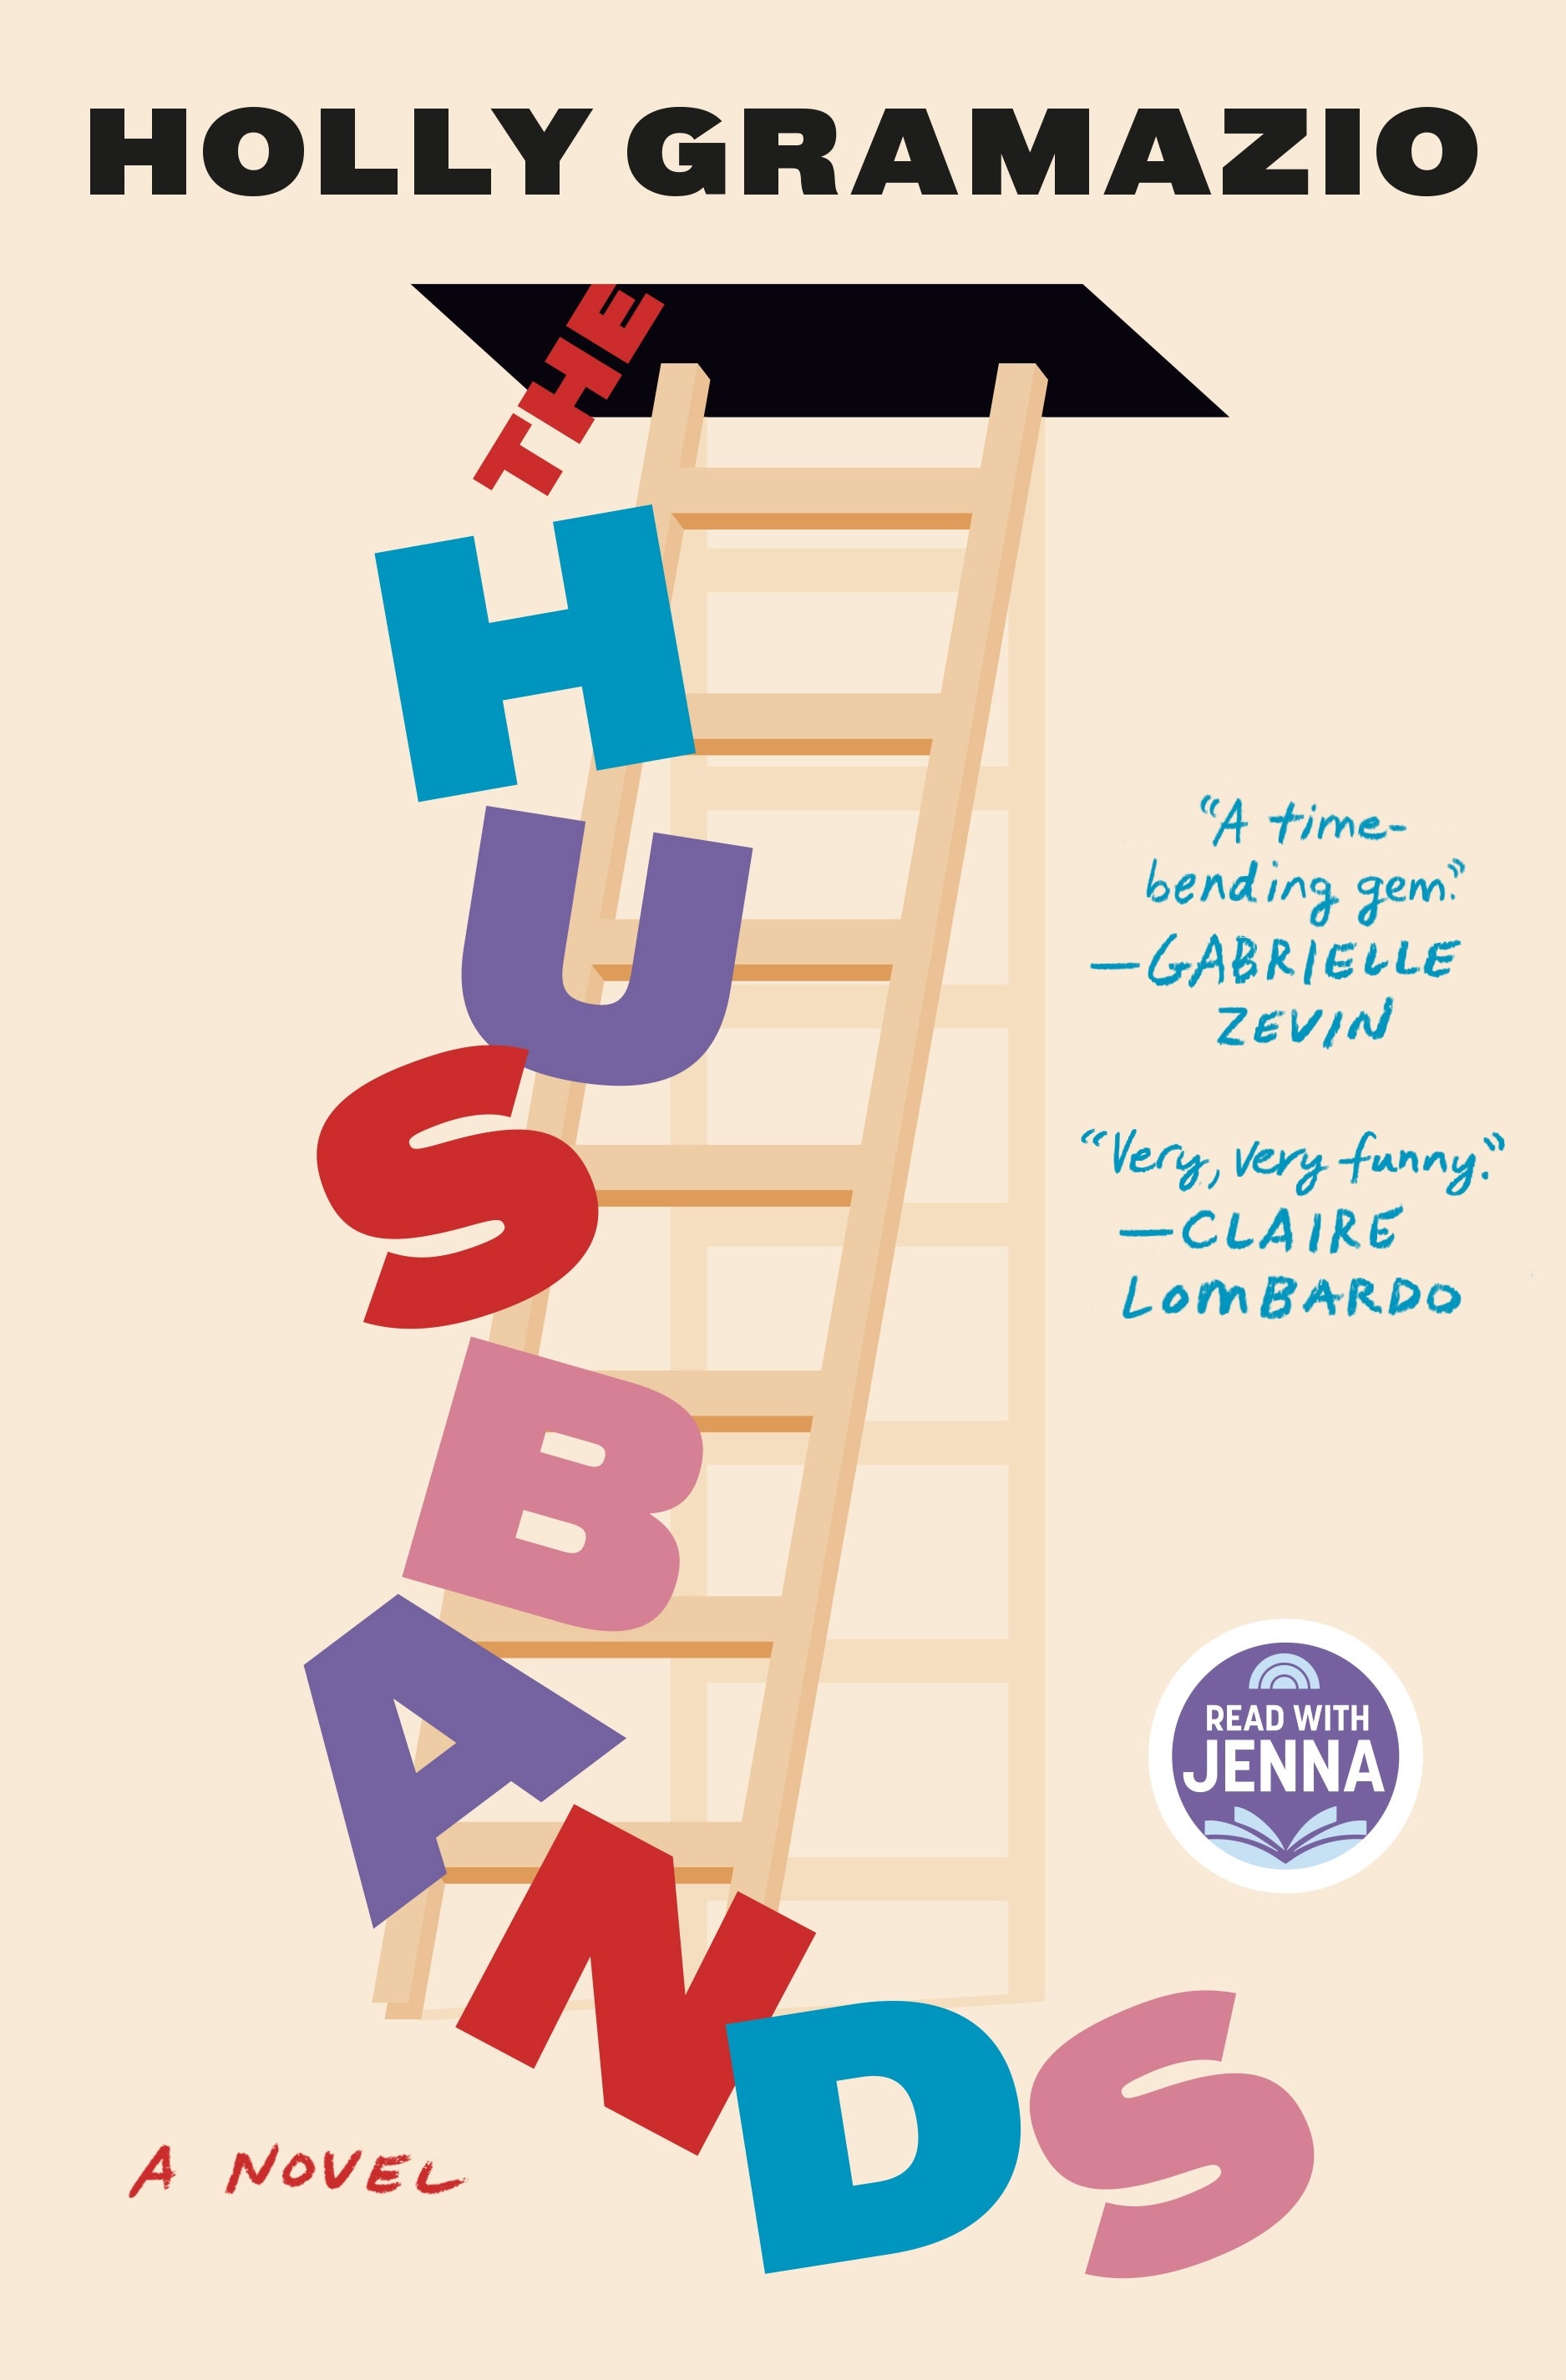 <p>In modern fiction, it's somewhat rare to come across a premise that is truly completely original. But Holly Gramazio pulls it off in her delightful debut <em>The Husbands</em>, which I not only tore through because I couldn't stop reading it, but did so with a smile on my face the entire time. It's really that charming.</p> <p>Lauren is a 30-something who is mostly content with her life, even though her best friend is getting married and she's super single. That is until her friend's bachelorette party. When Lauren stumbles home after a night of fun, there's a man in her apartment, and he says he's her husband. Then, the man goes upstairs into her attic, and a completely new husband comes down. Soon, Lauren learns she can get a new husband and an accompanying new life anytime she wants, just by sending them upstairs. Through Lauren's journey, Gramazio explores the paradox of modern dating. Mainly, when you can infinitely swipe (or in this case, swap) how do you know when you've found the one?</p> <p><em>—SM</em></p> <p><em>Out now</em></p><p>Sign up for today’s biggest stories, from pop culture to politics.</p><a href="https://www.glamour.com/newsletter/news?sourceCode=msnsend">Sign Up</a>